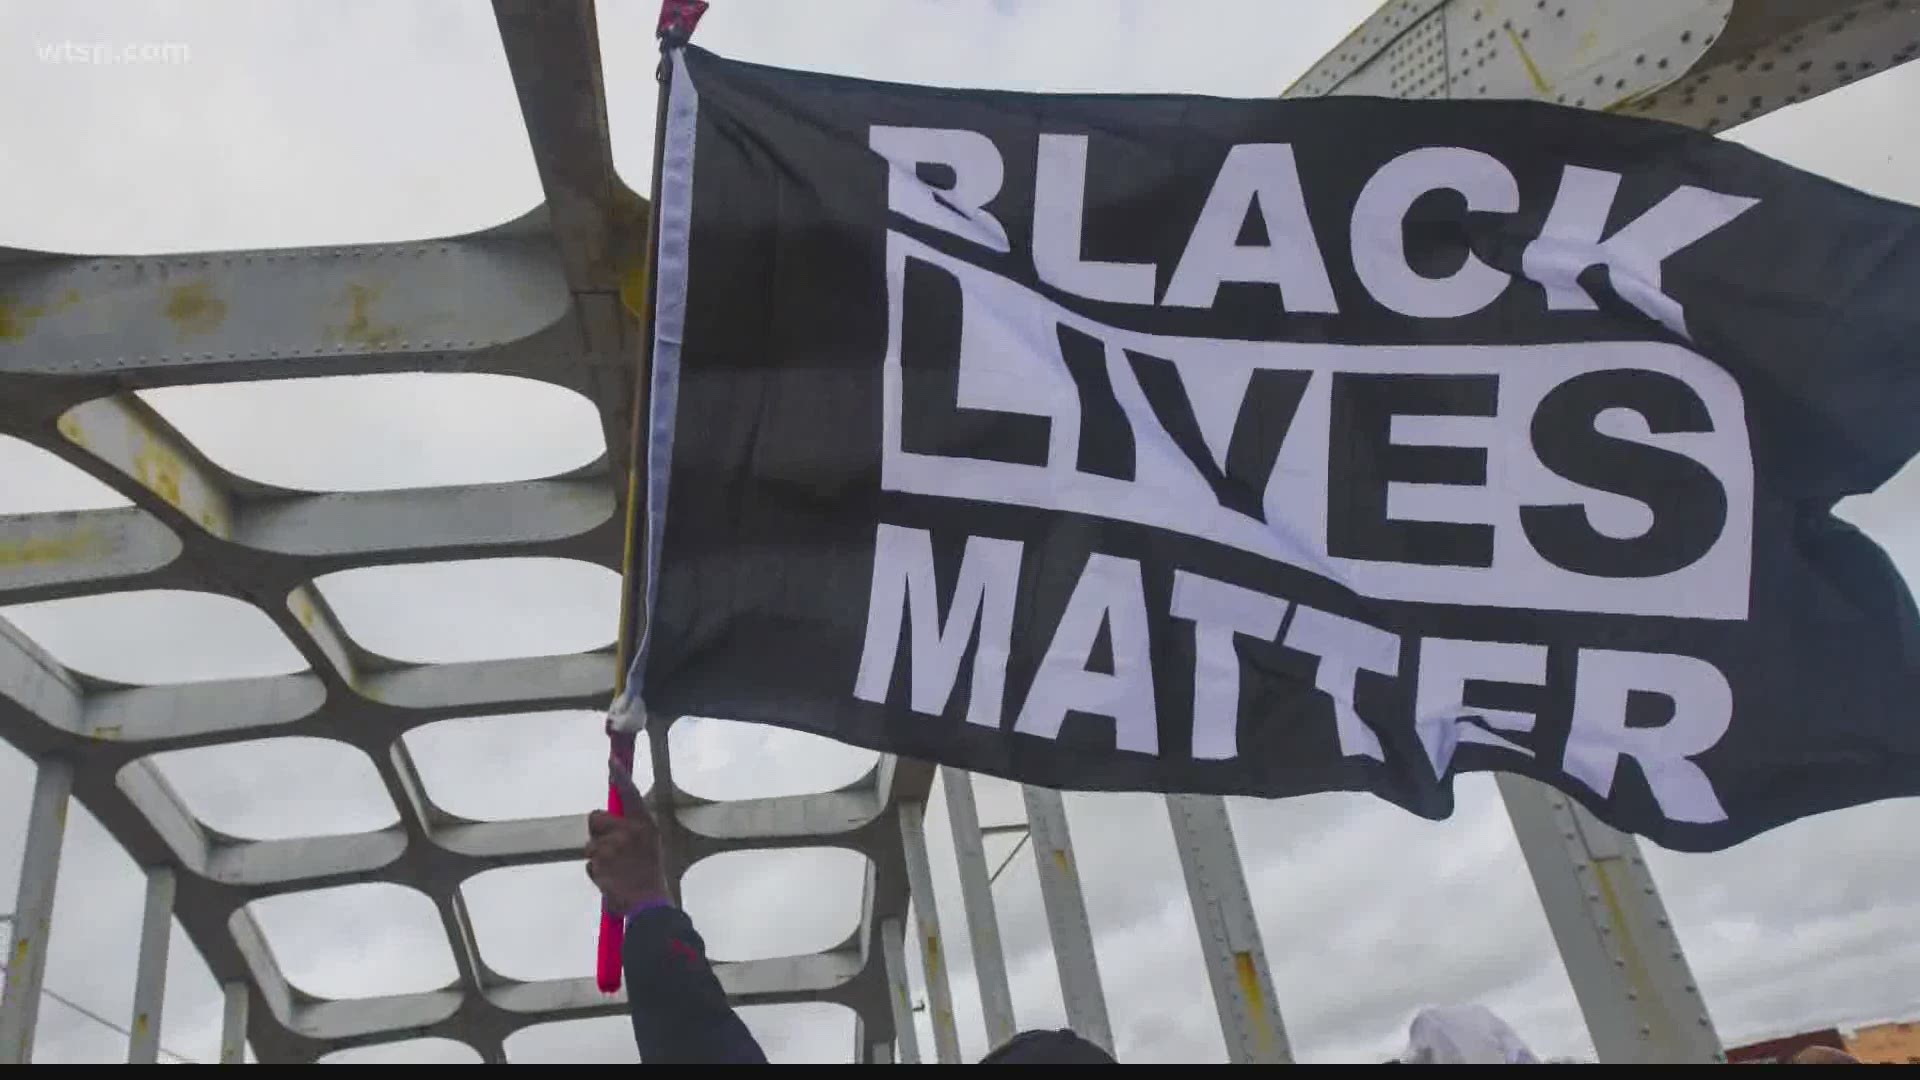 The Black Lives Matter movement goes back years and is a cry to be heard. Jabari Thomas explains why the "all lives matter" statement is both frustrating and hurtful